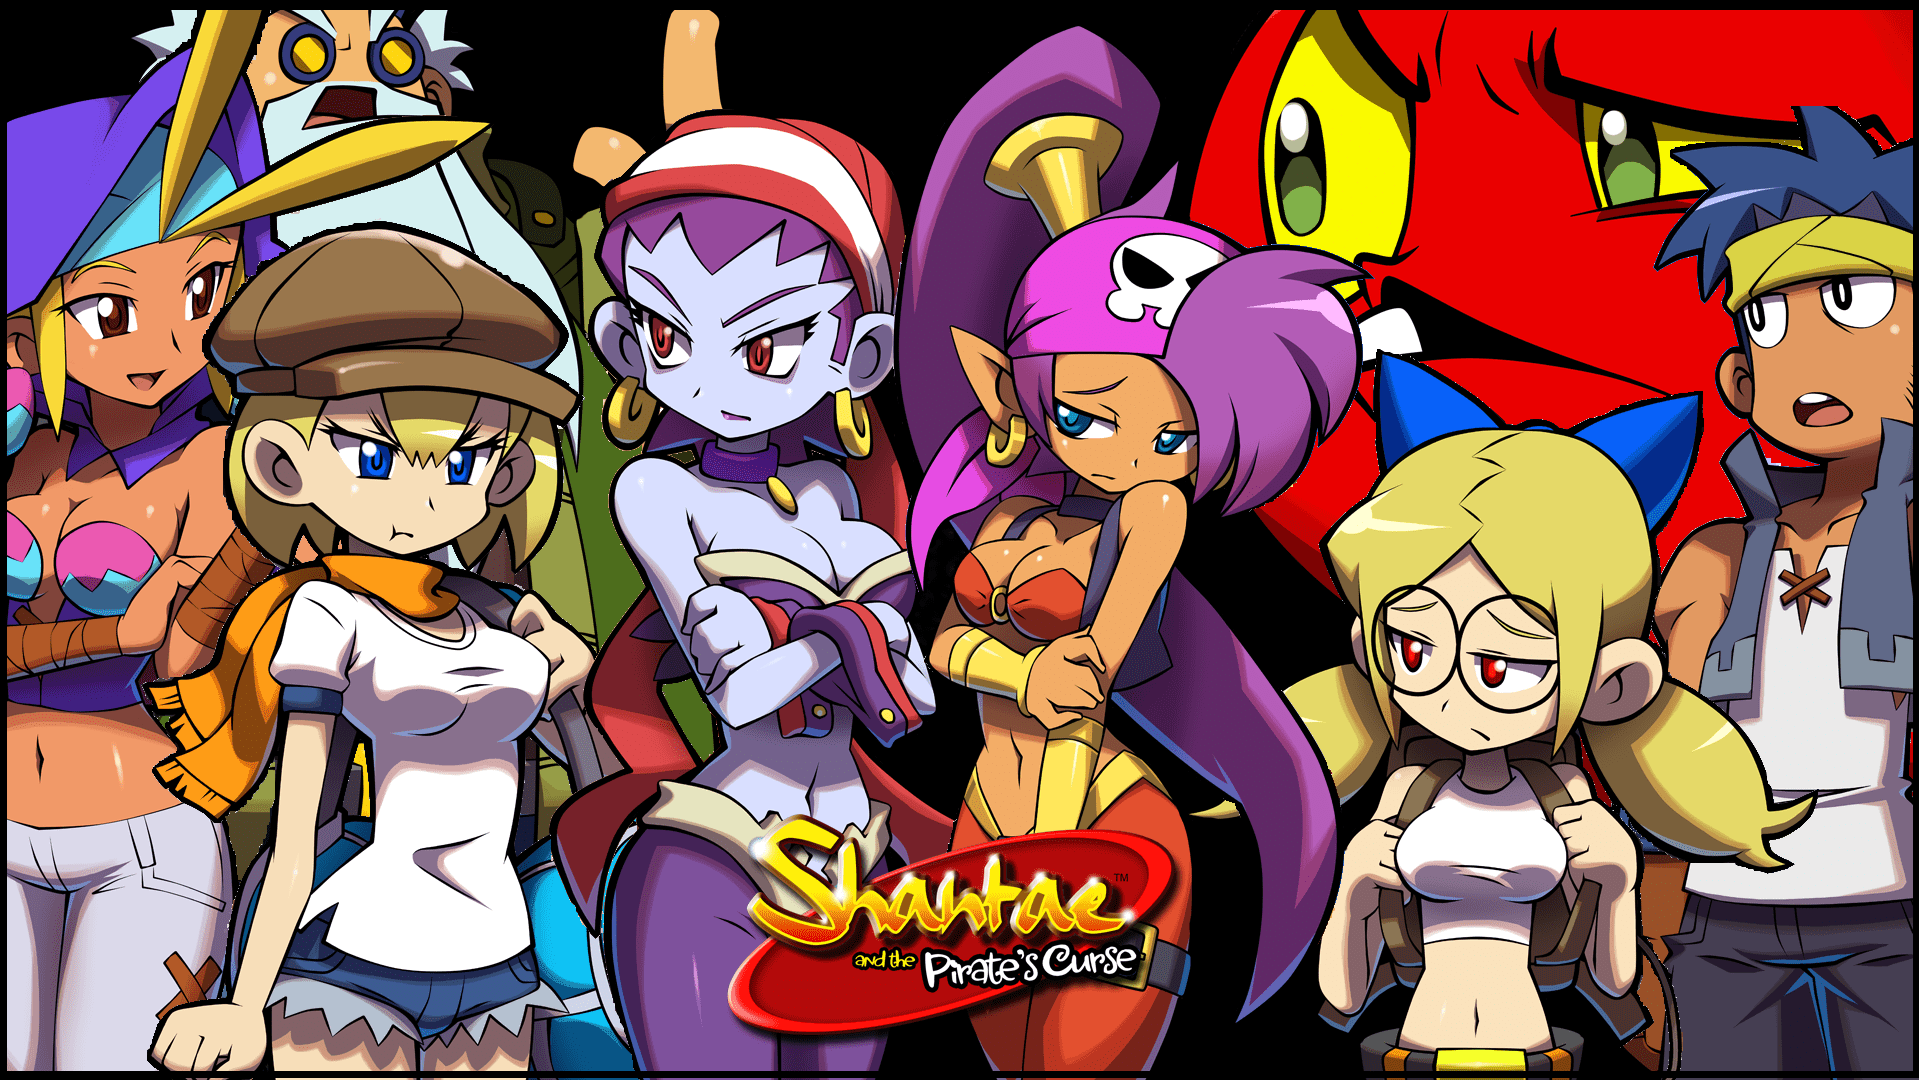 Shantae and Rotty wallpaper by GabesirFaze  Download on ZEDGE  ef1e